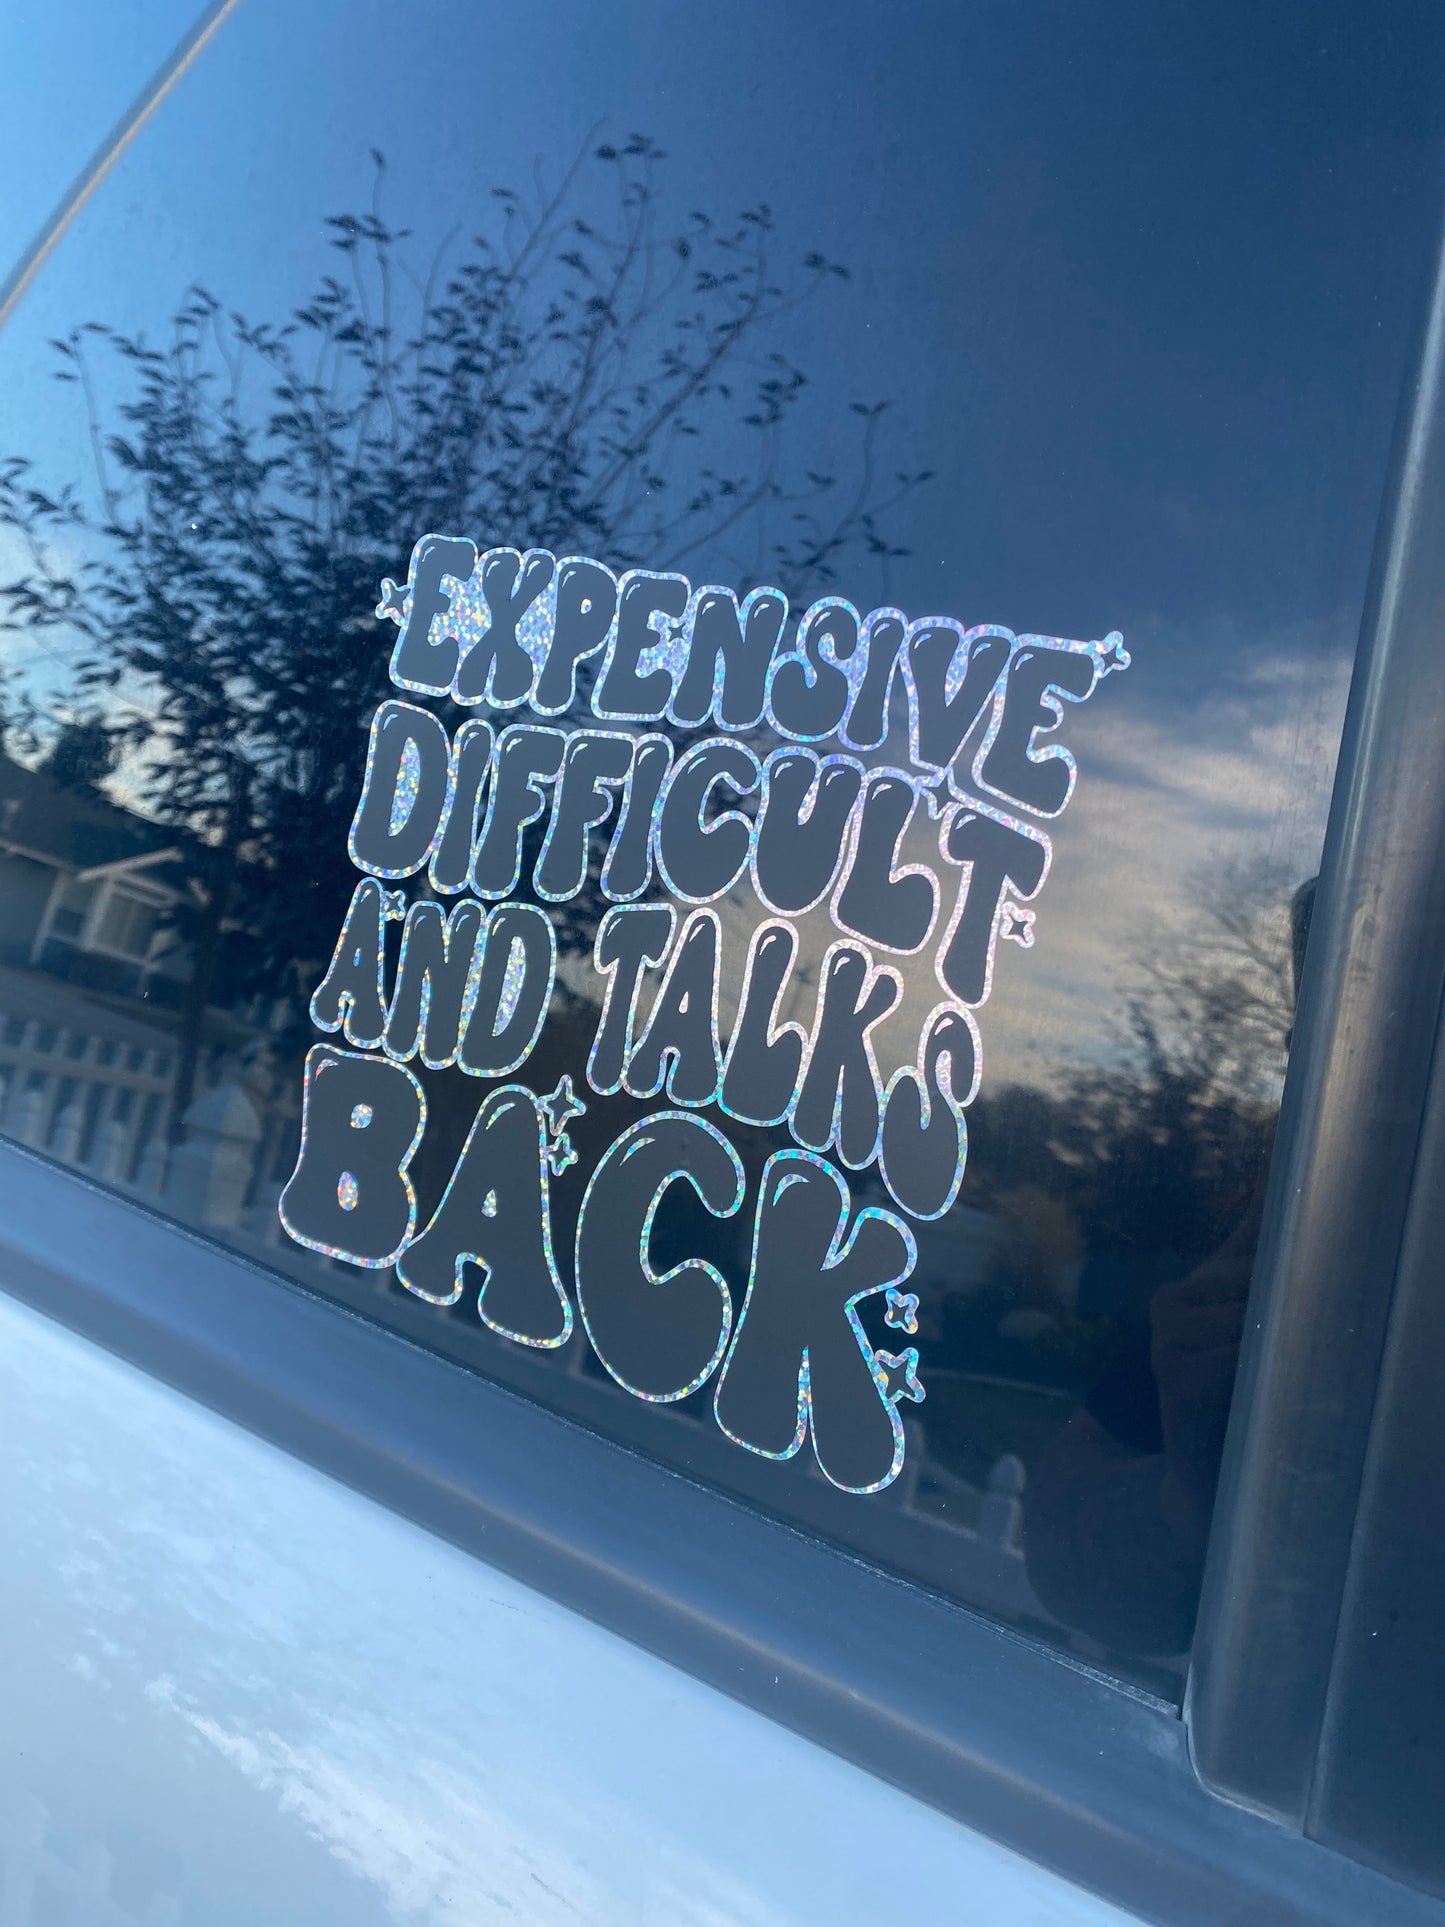 Expensive, Difficult And Talks Back Car Decal